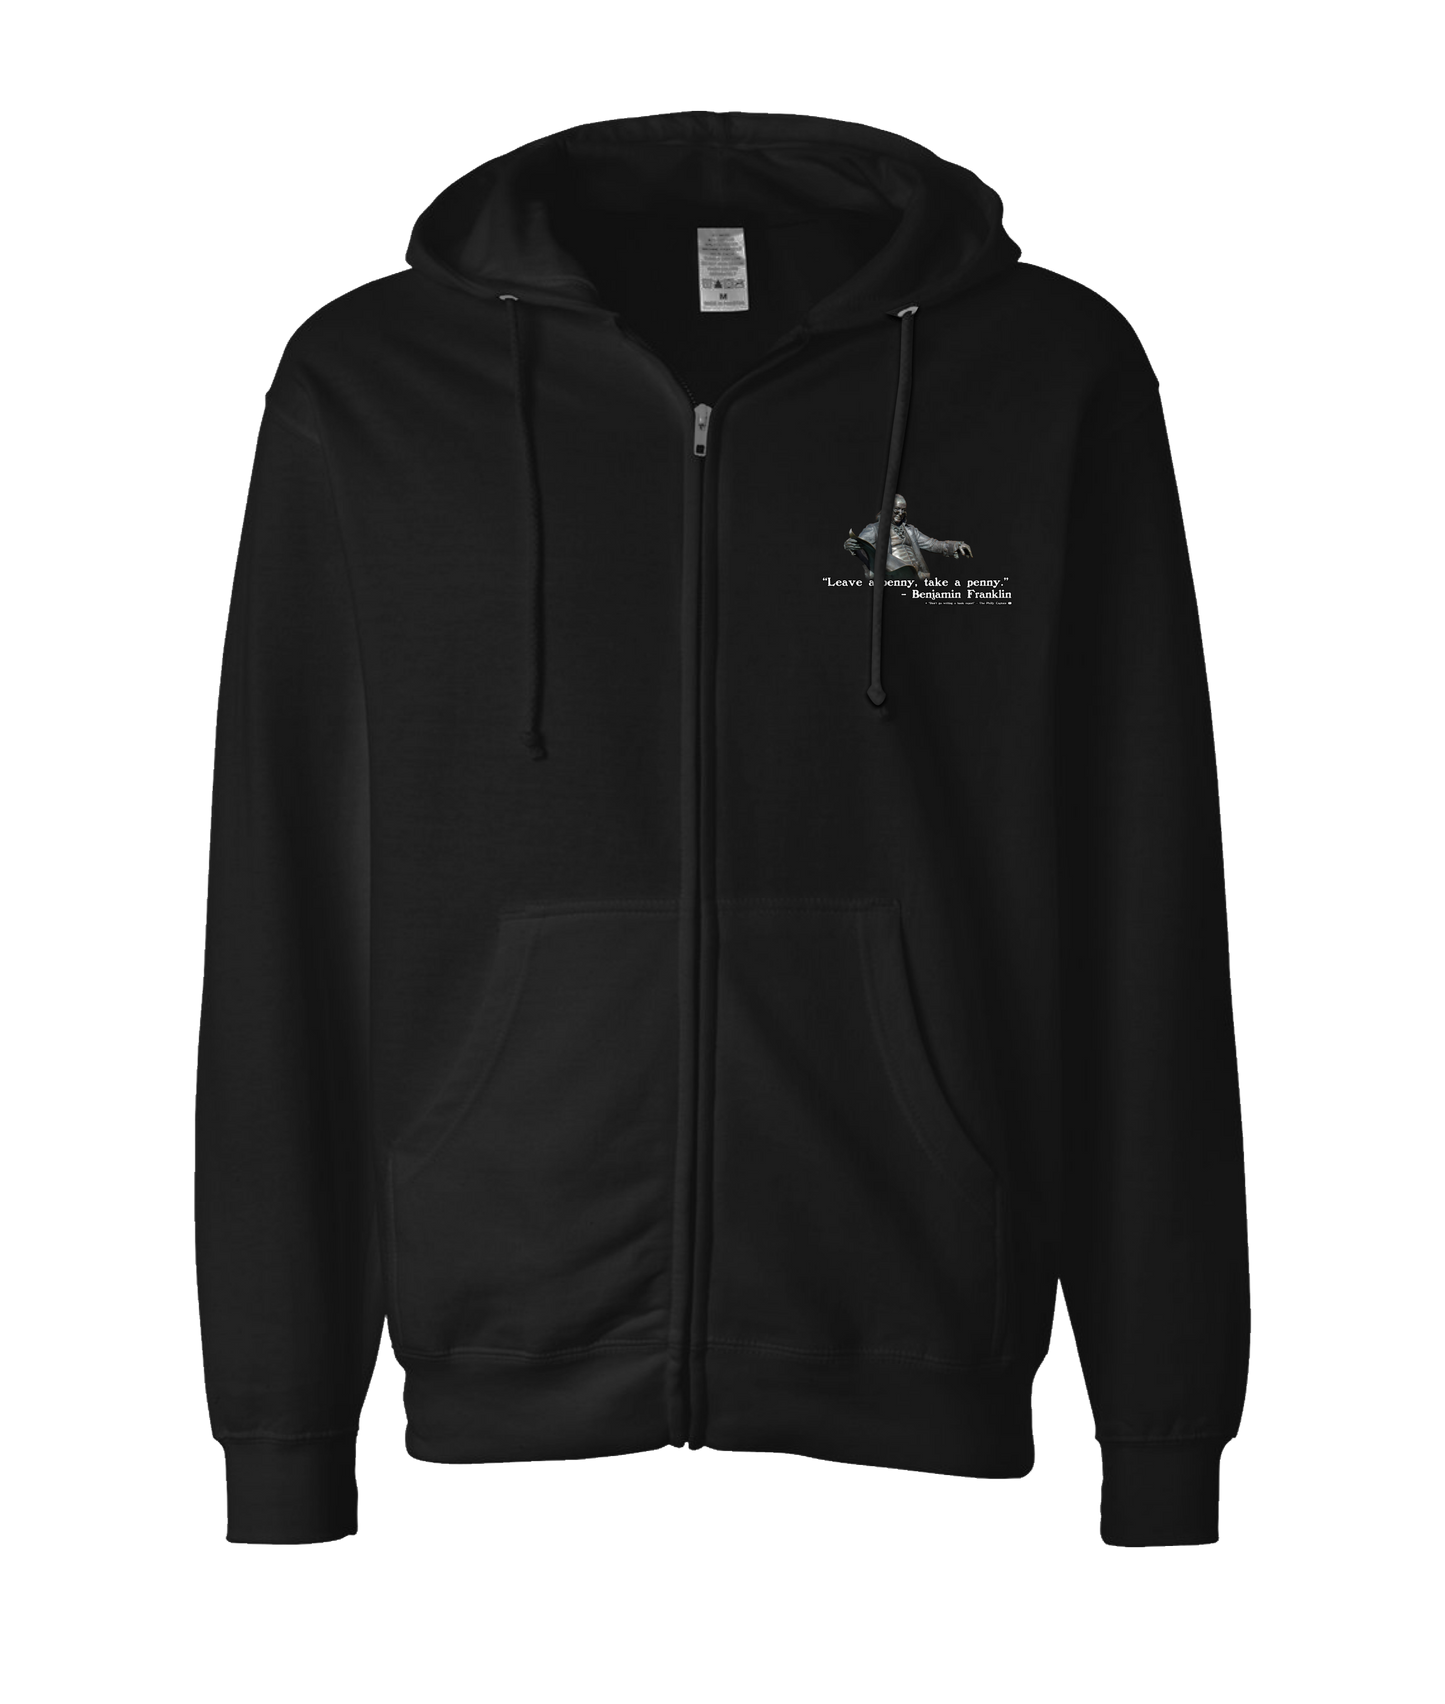 The Philly Captain's Merch is Fire - Leave a penny, take a penny - Black Zip Up Hoodie